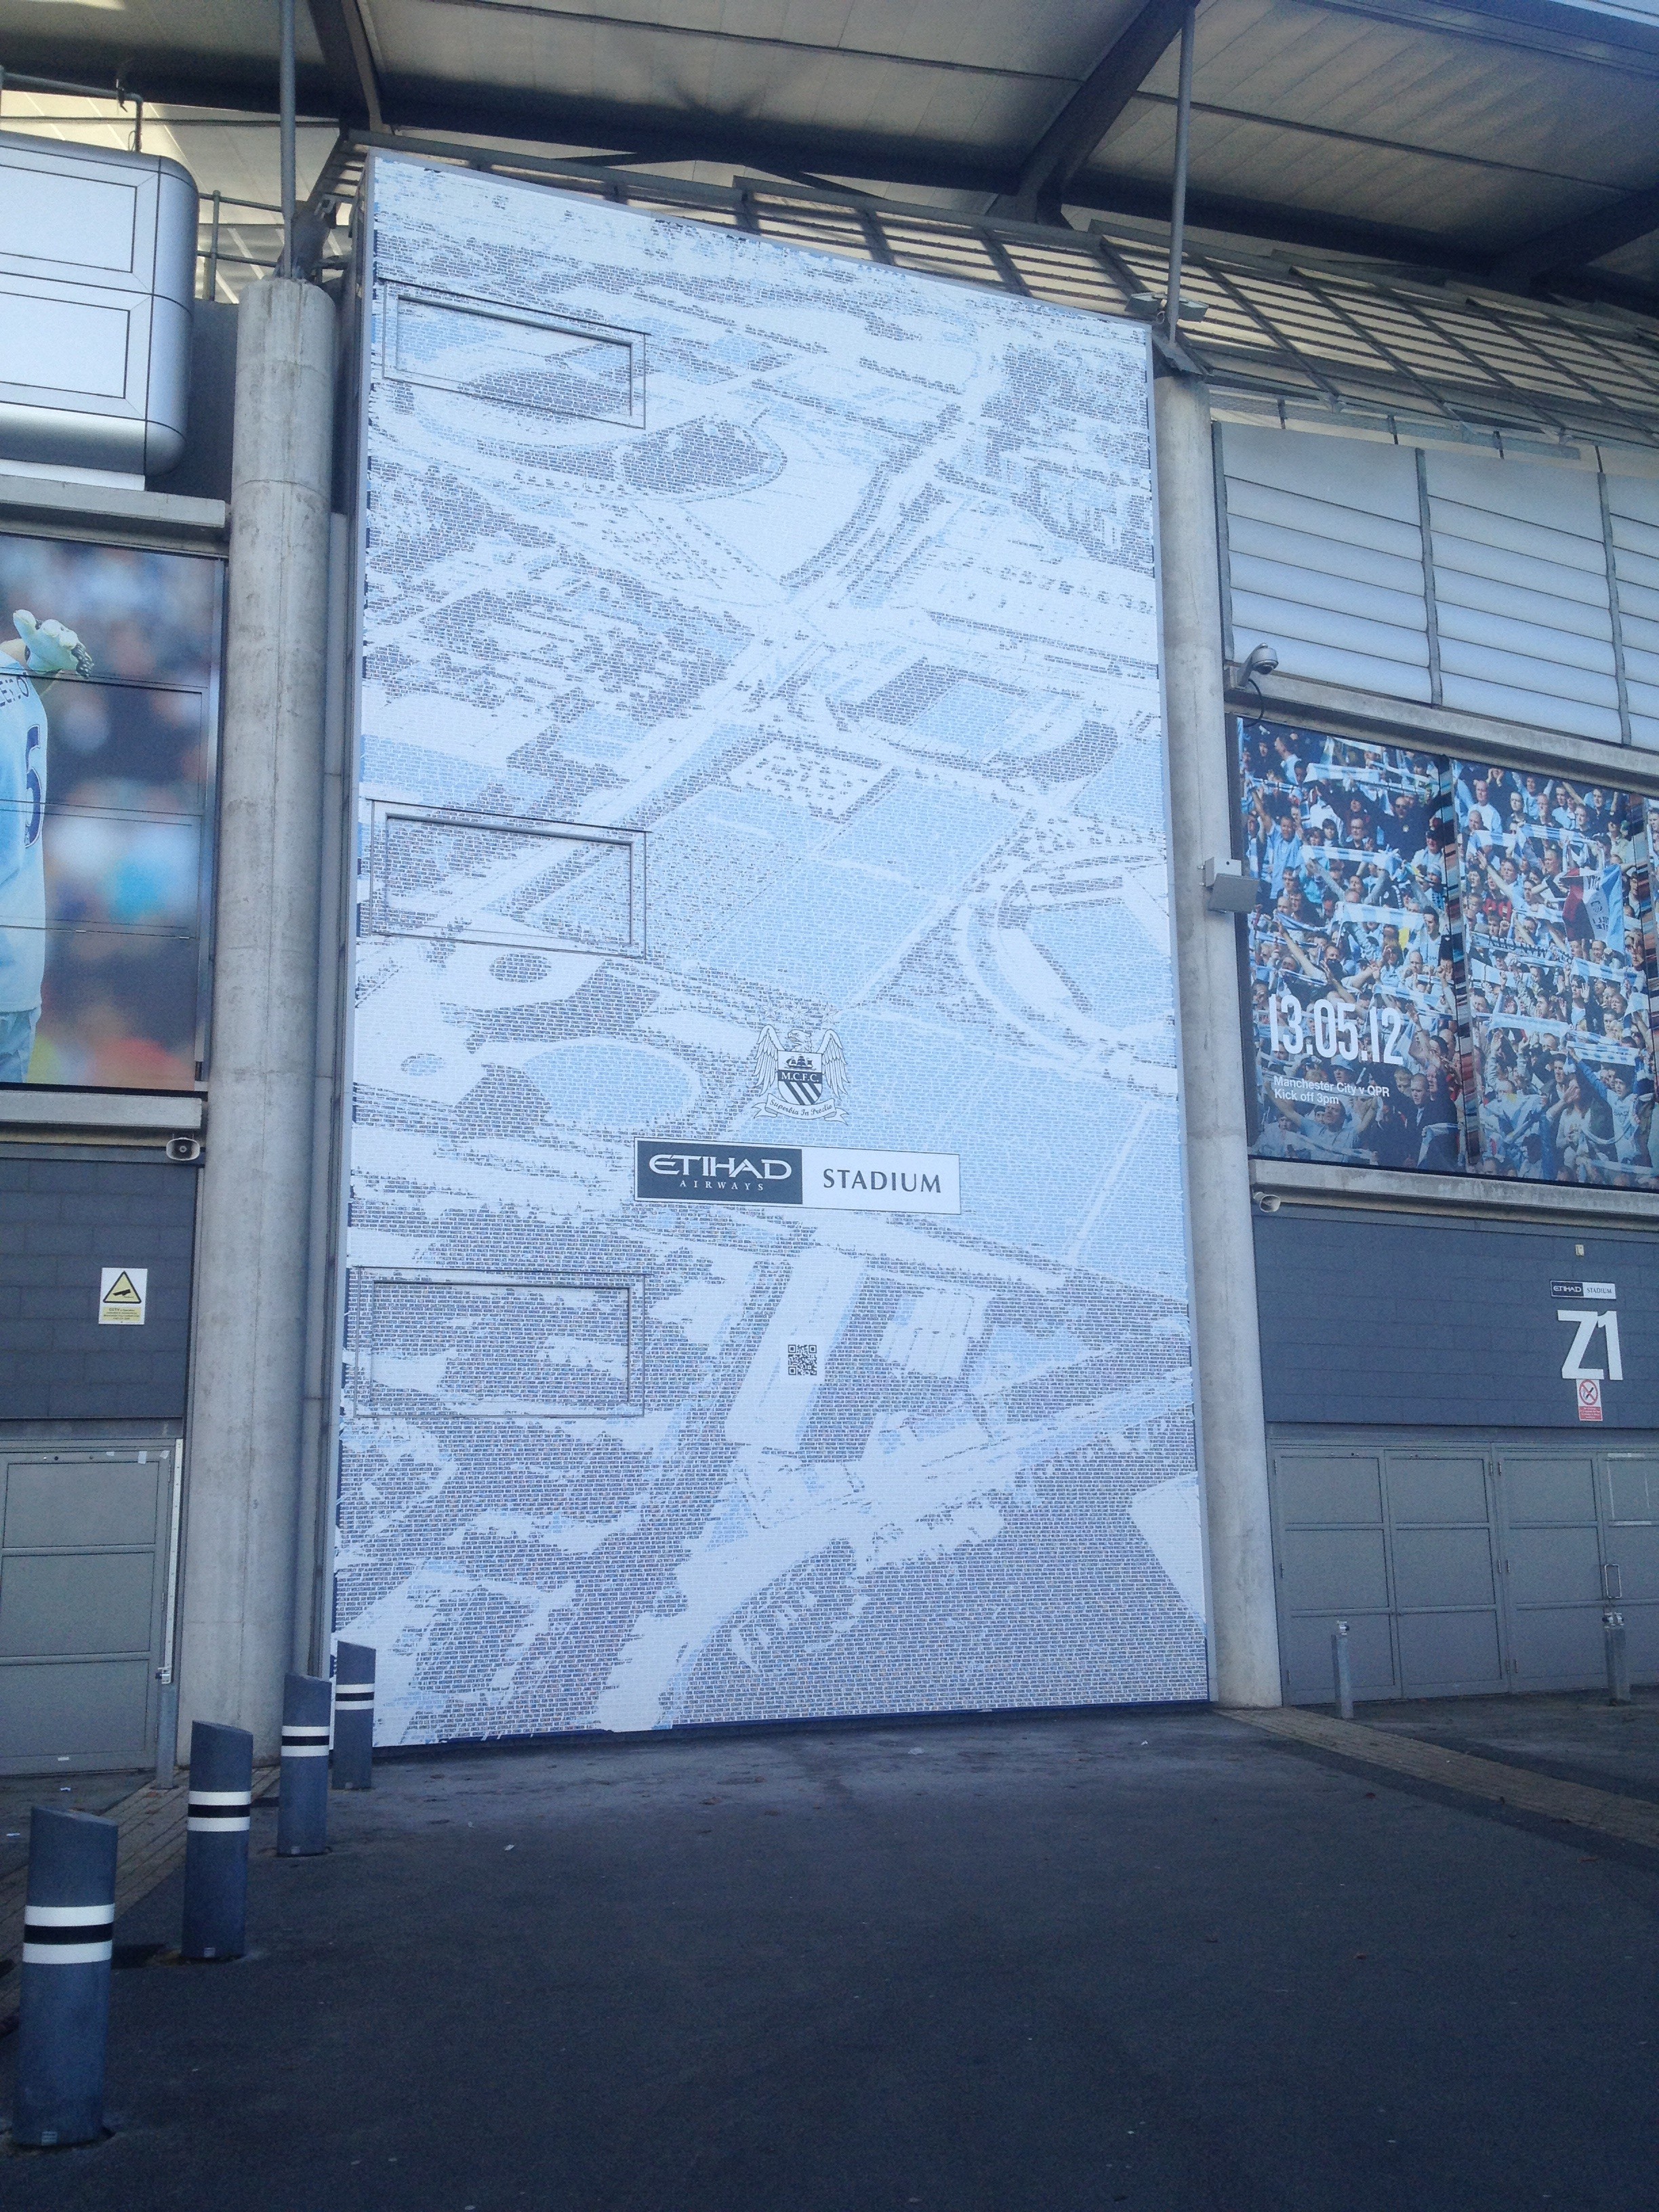 Members names make up this large art piece outside the stadium